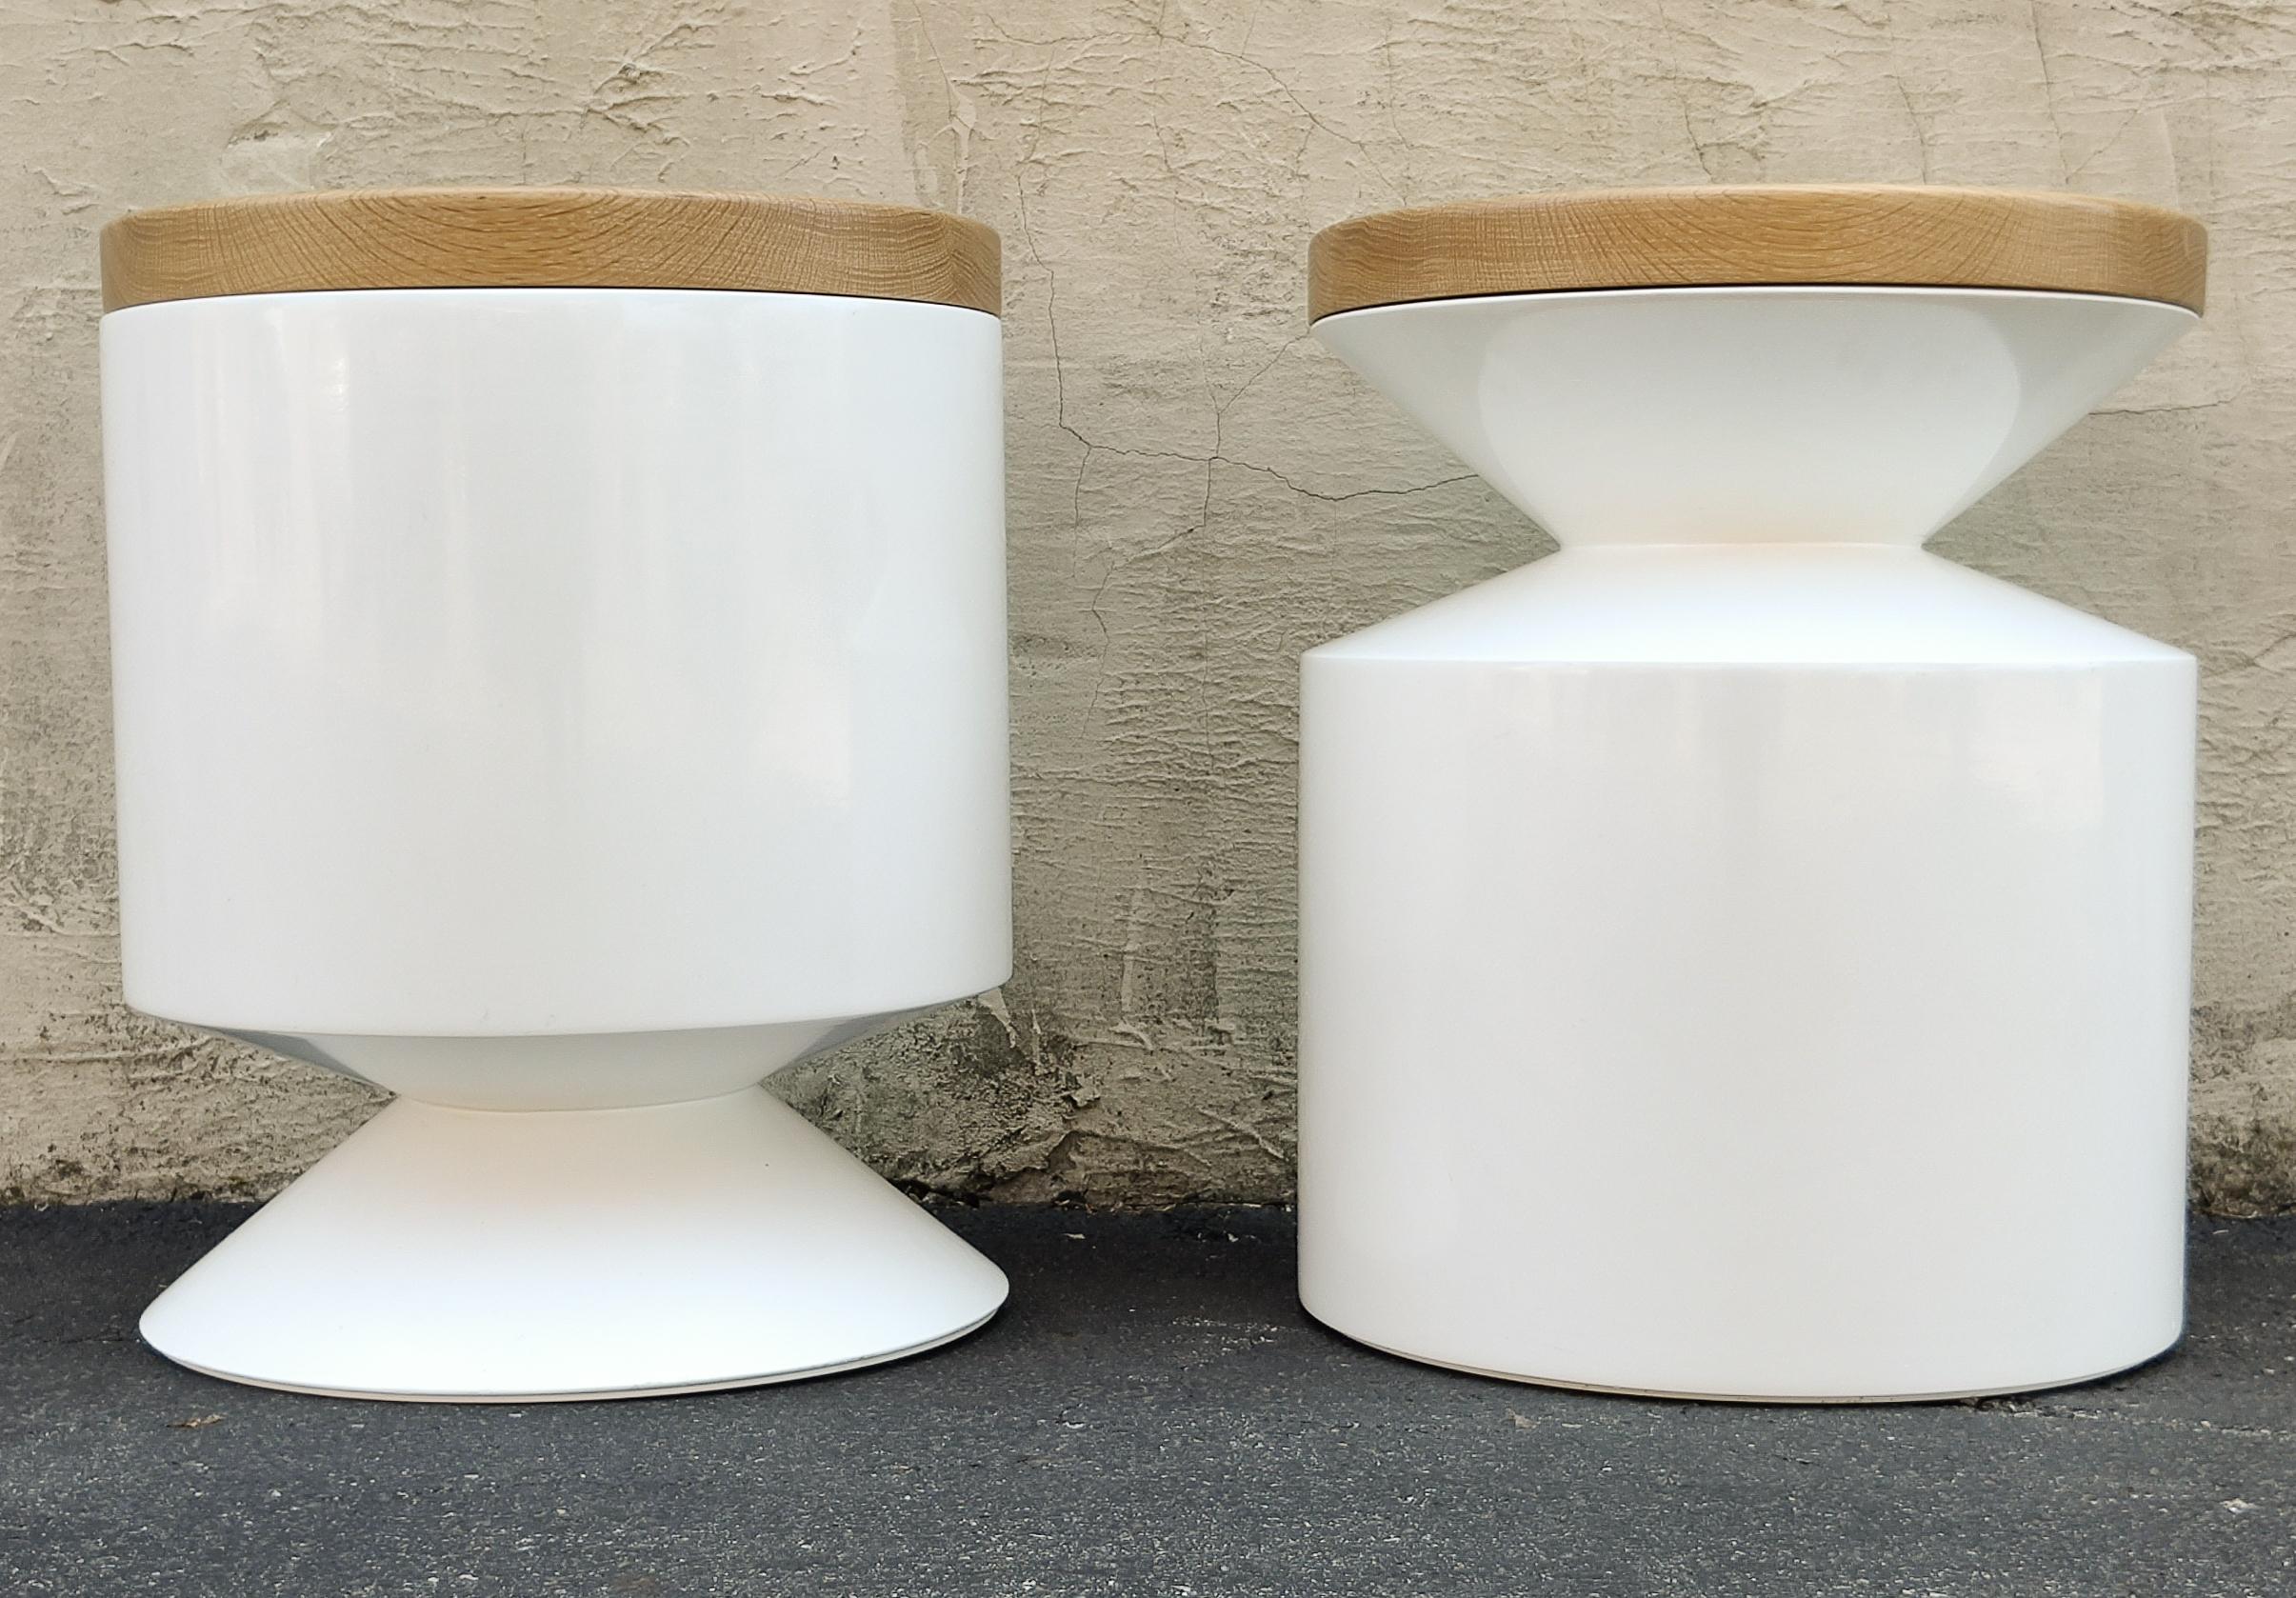 Space Age Phase Design Griffin Pair of Side Tables or Stools by Reza Feiz Fiberglass & Oak For Sale